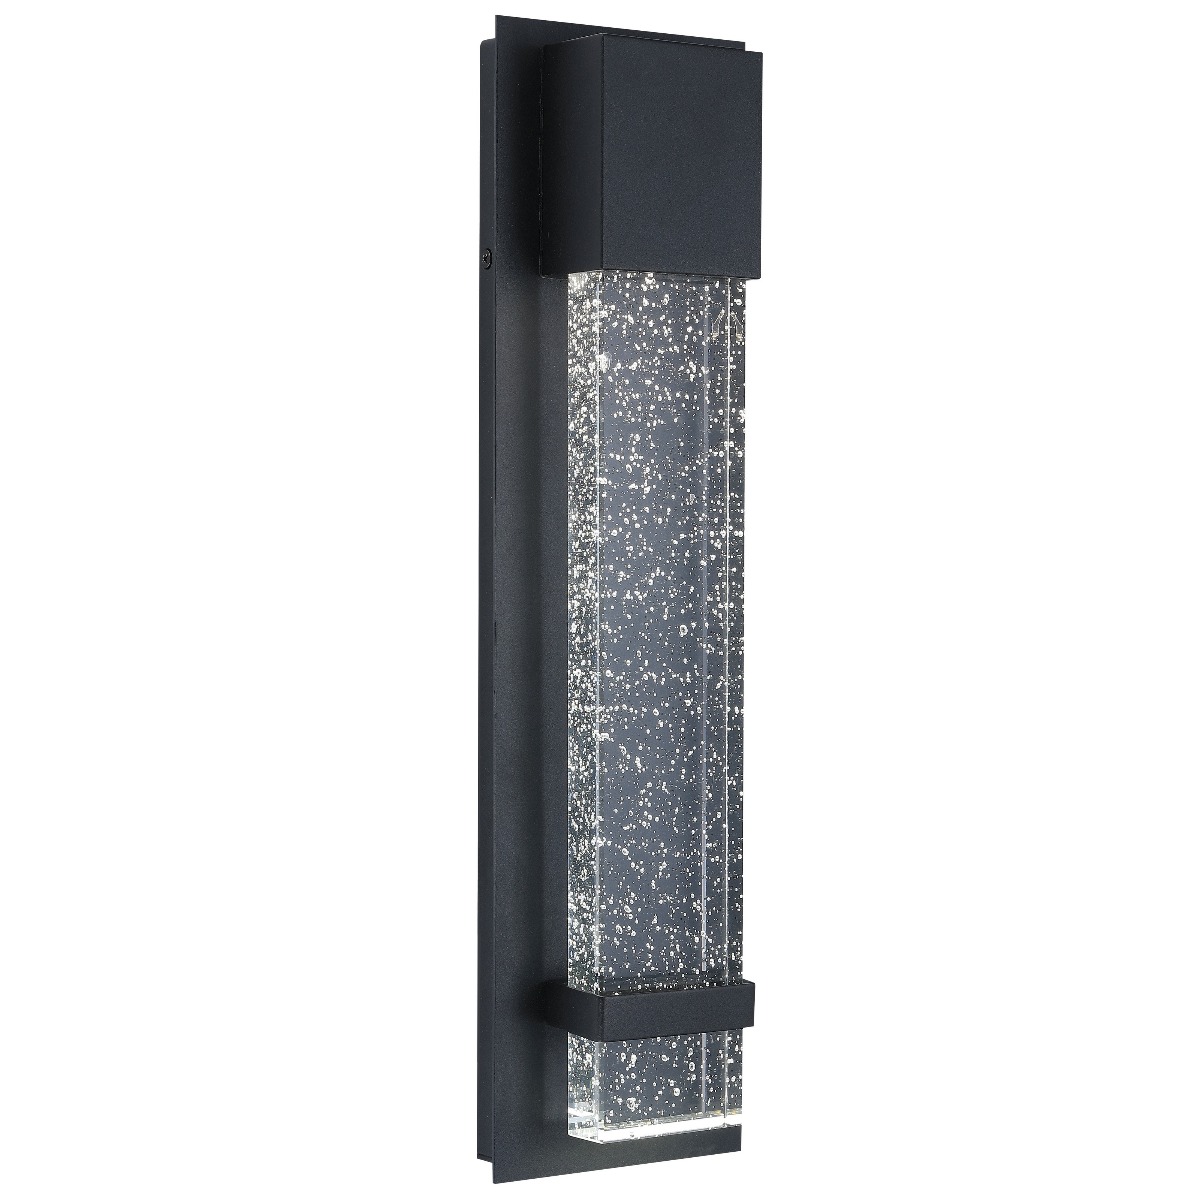 Alcon 11247 Architectural Outdoor LED Clear Seeded Lens Wall Sconce - 18 in